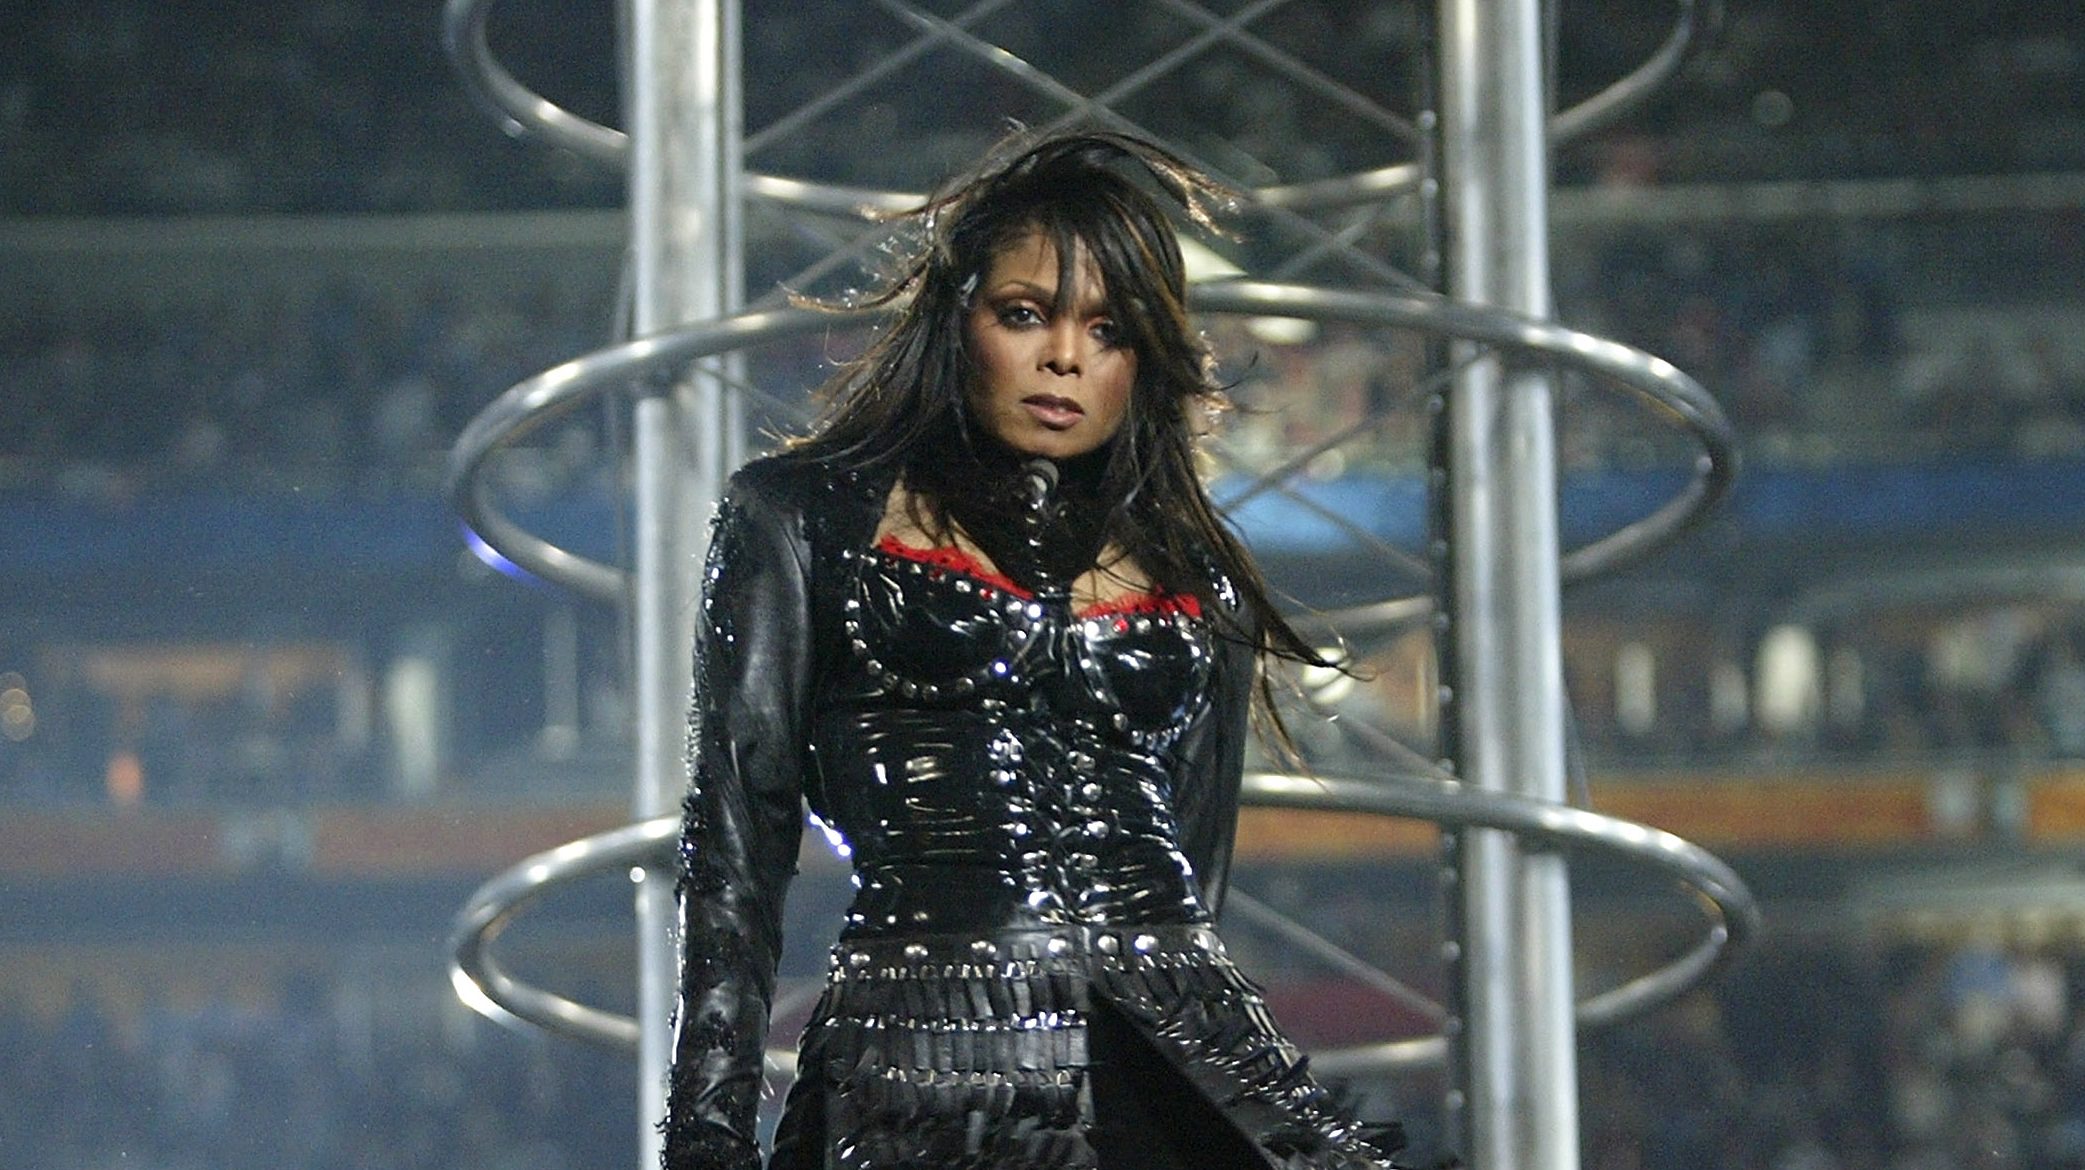 Janet Jackson performing at the 2004 Super Bowl halftime show